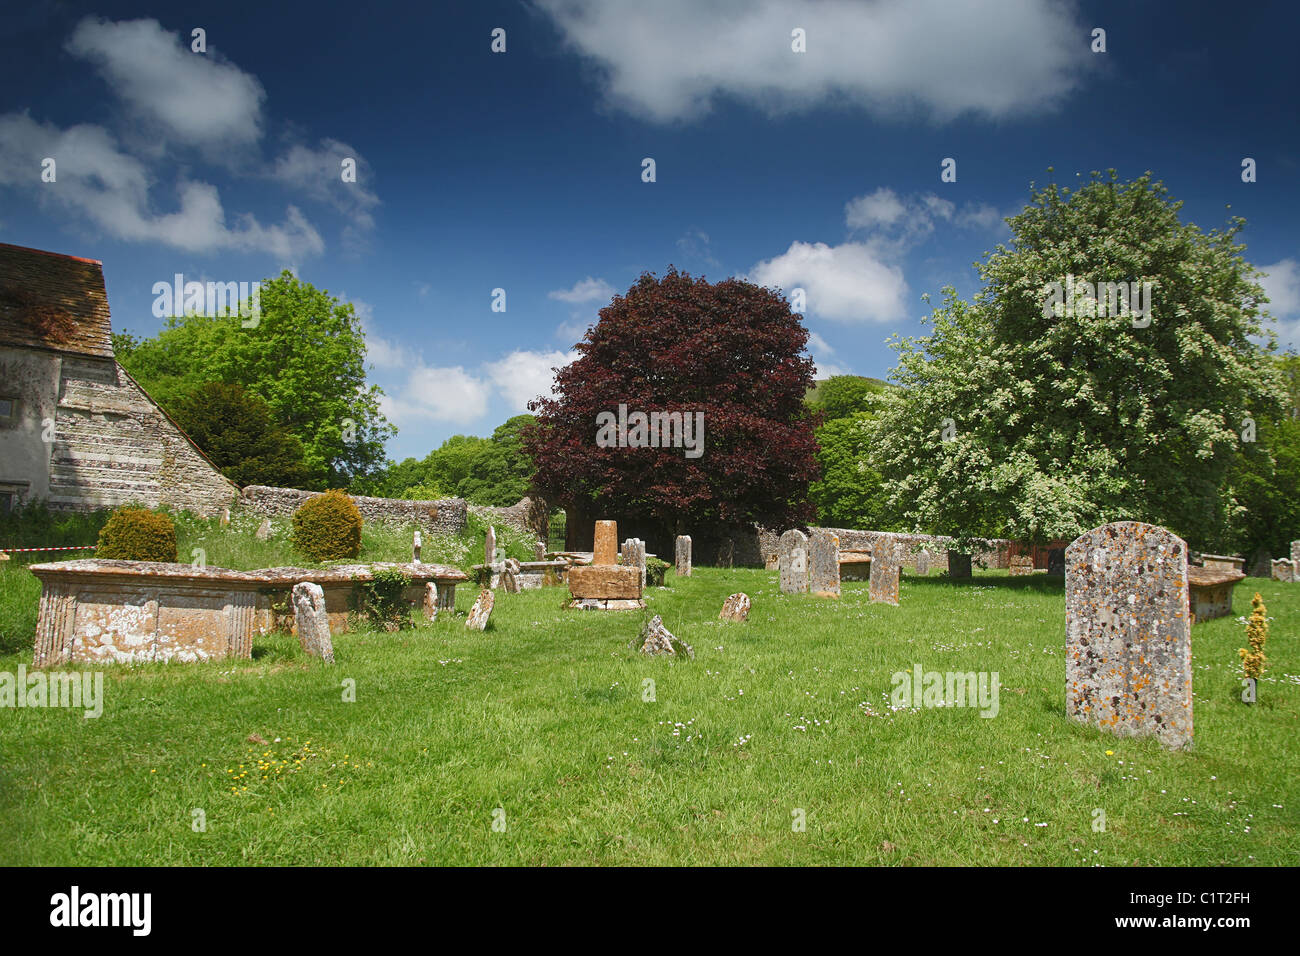 Graveyard of the former Benedictine Abbey in Cerne Abbas, Dorset, England, UK Stock Photo